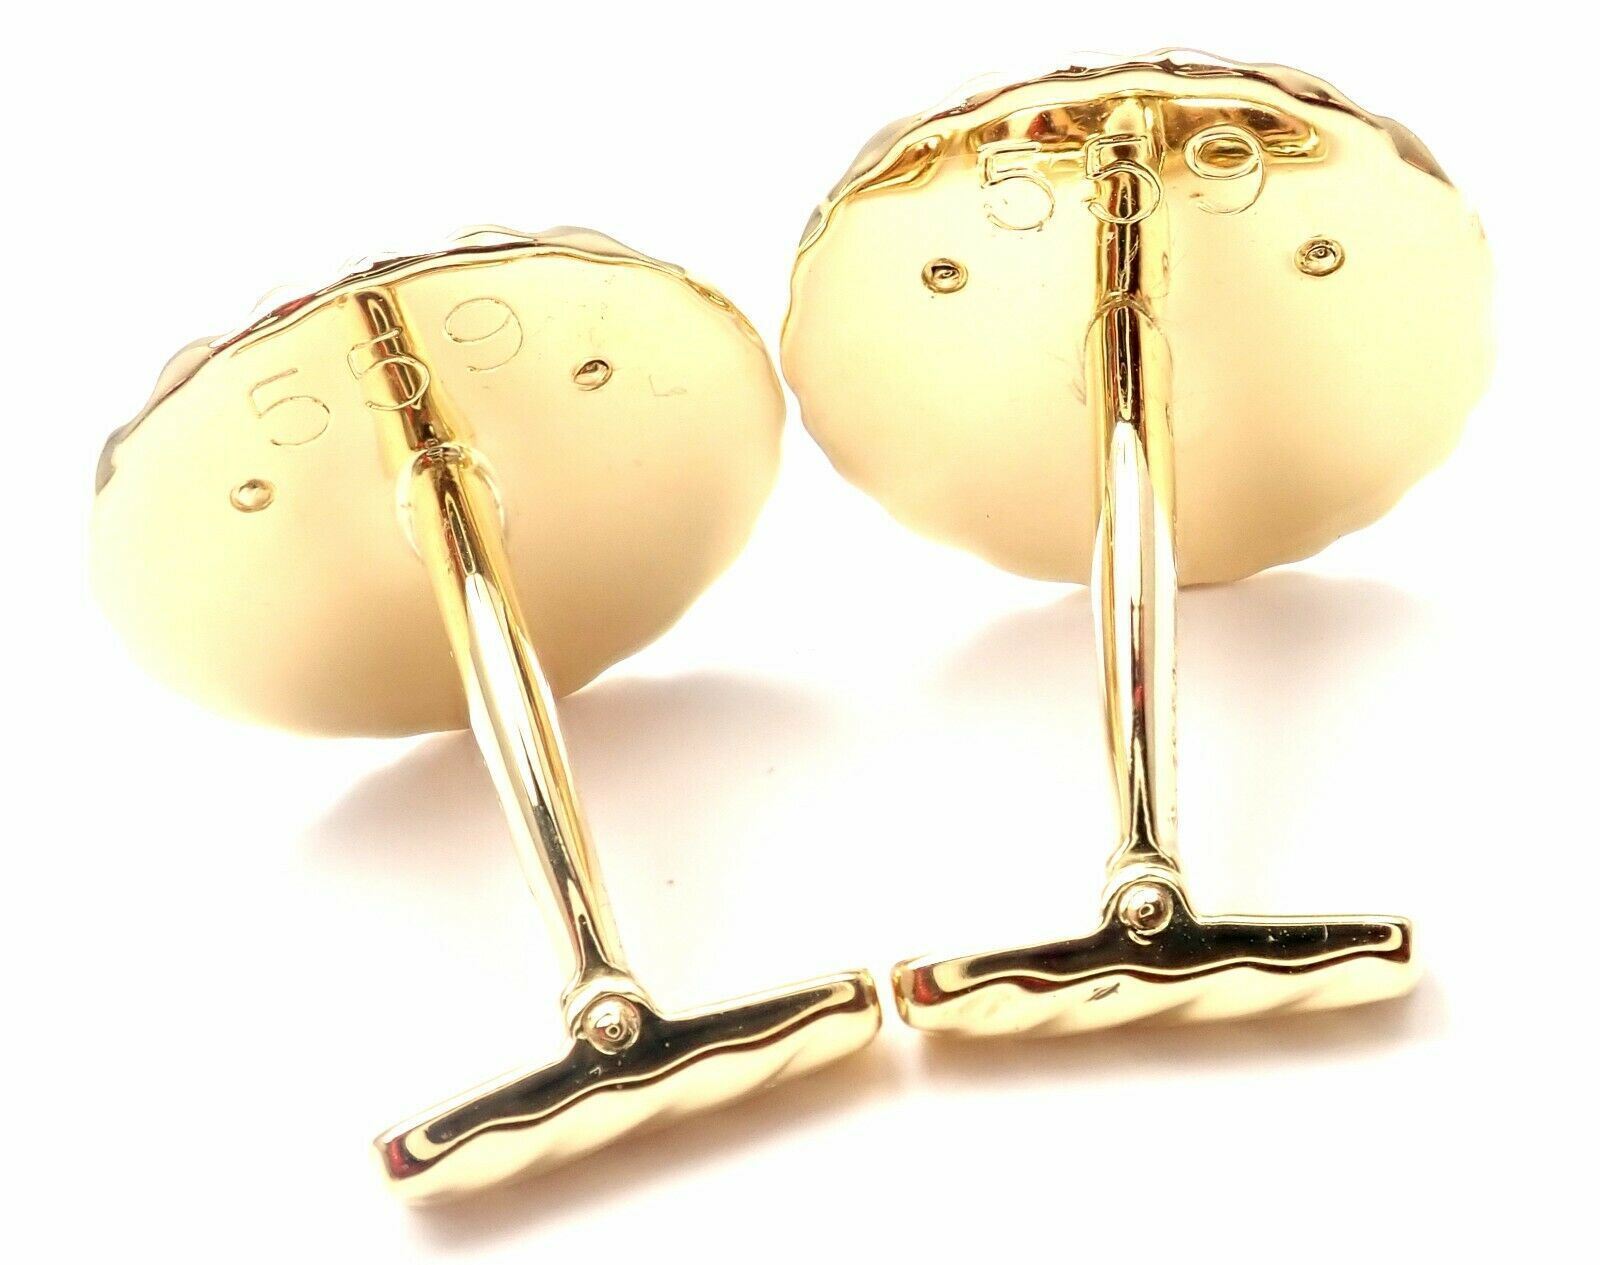 Van Cleef & Arpels Jewelry & Watches:Men's Jewelry:Cufflinks Rare! Authentic Van Cleef & Arpels 18k Yellow Gold Panther Panthere Cufflinks